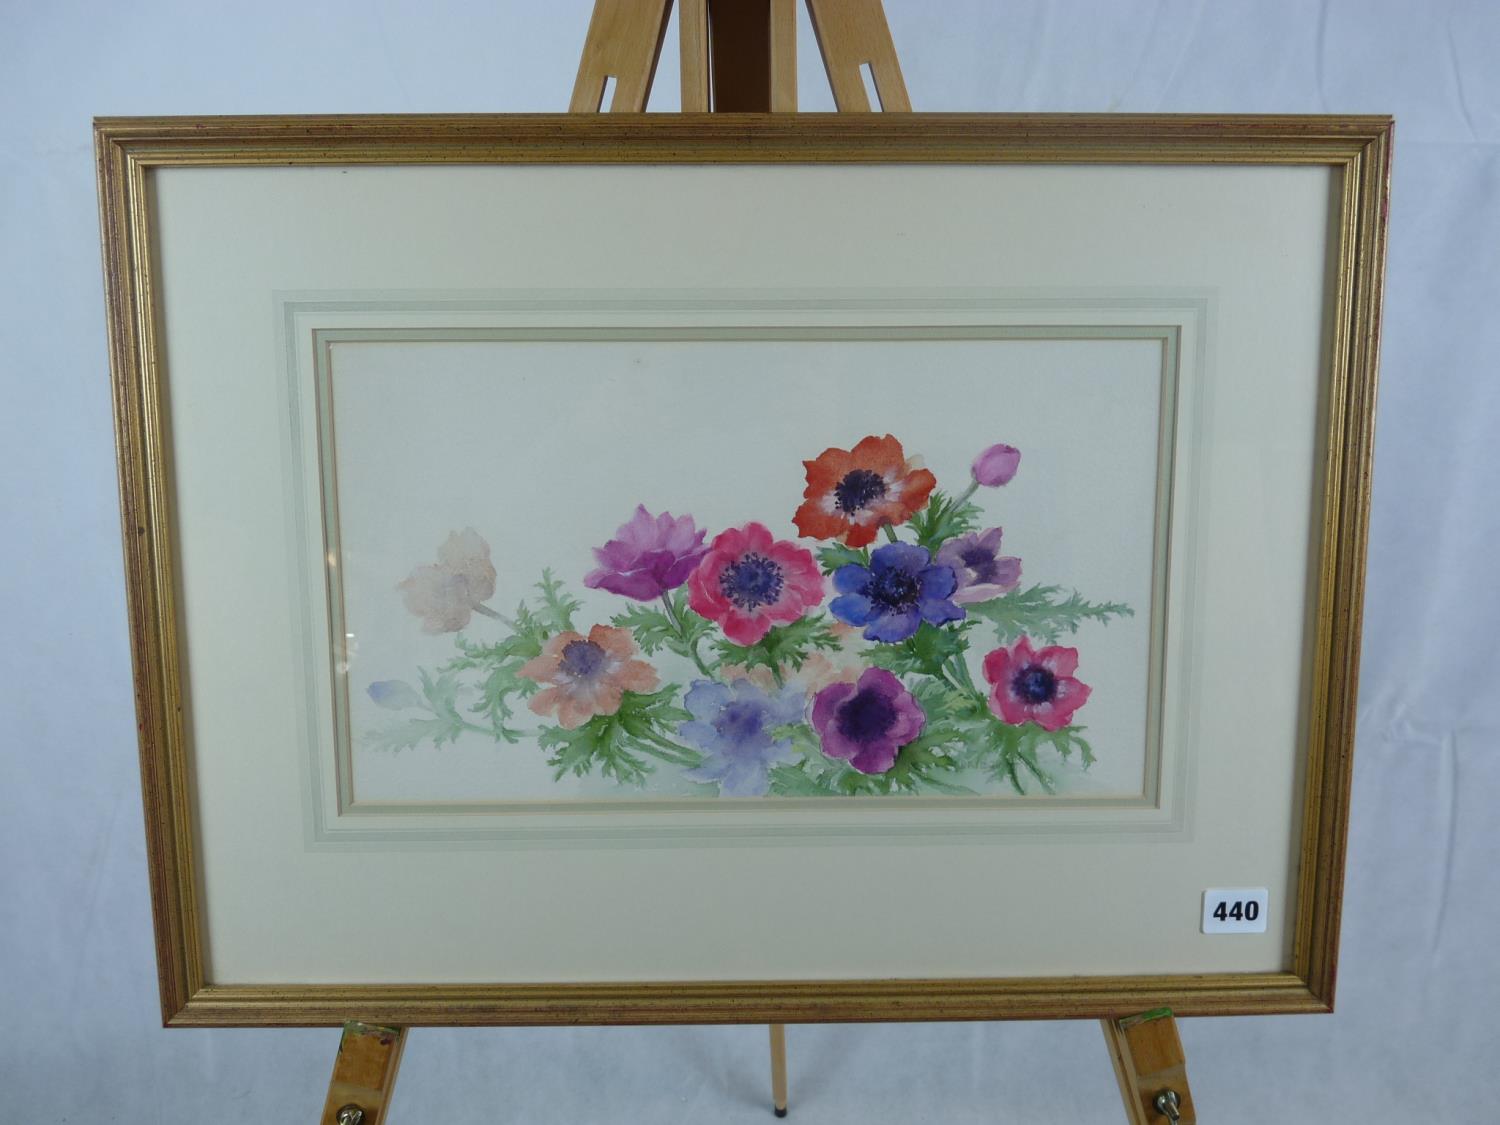 Framed and Mounted Watercolour of Floral Still Life by Elizabeth Bridges RI. 38 x 22cm